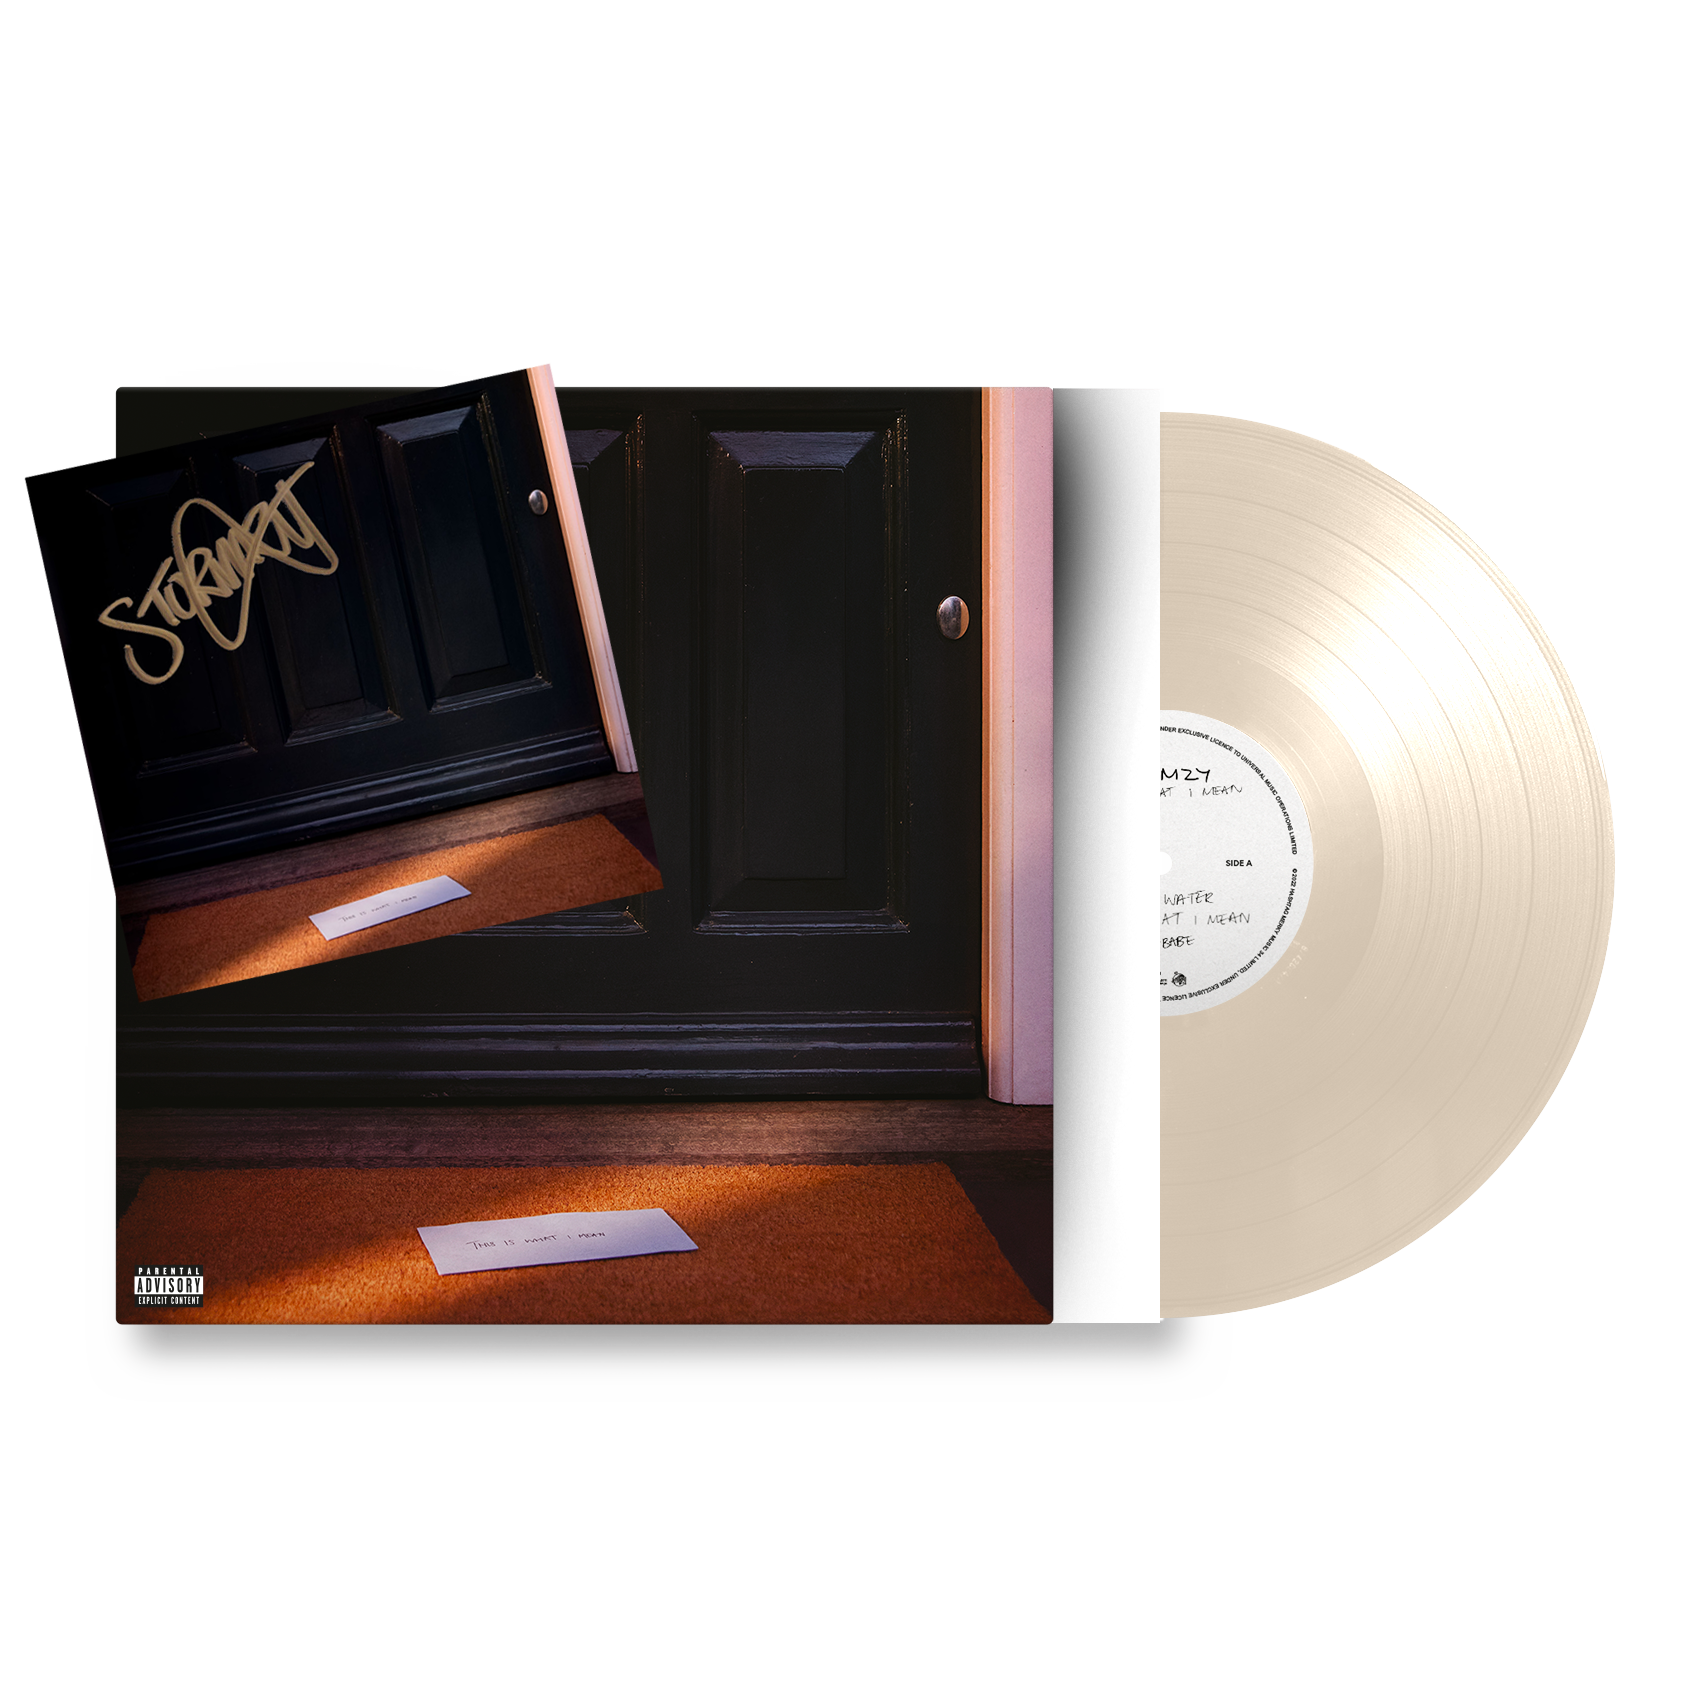 This Is What I Mean: Limited Cream Vinyl 2LP + Exclusive Signed Art Card